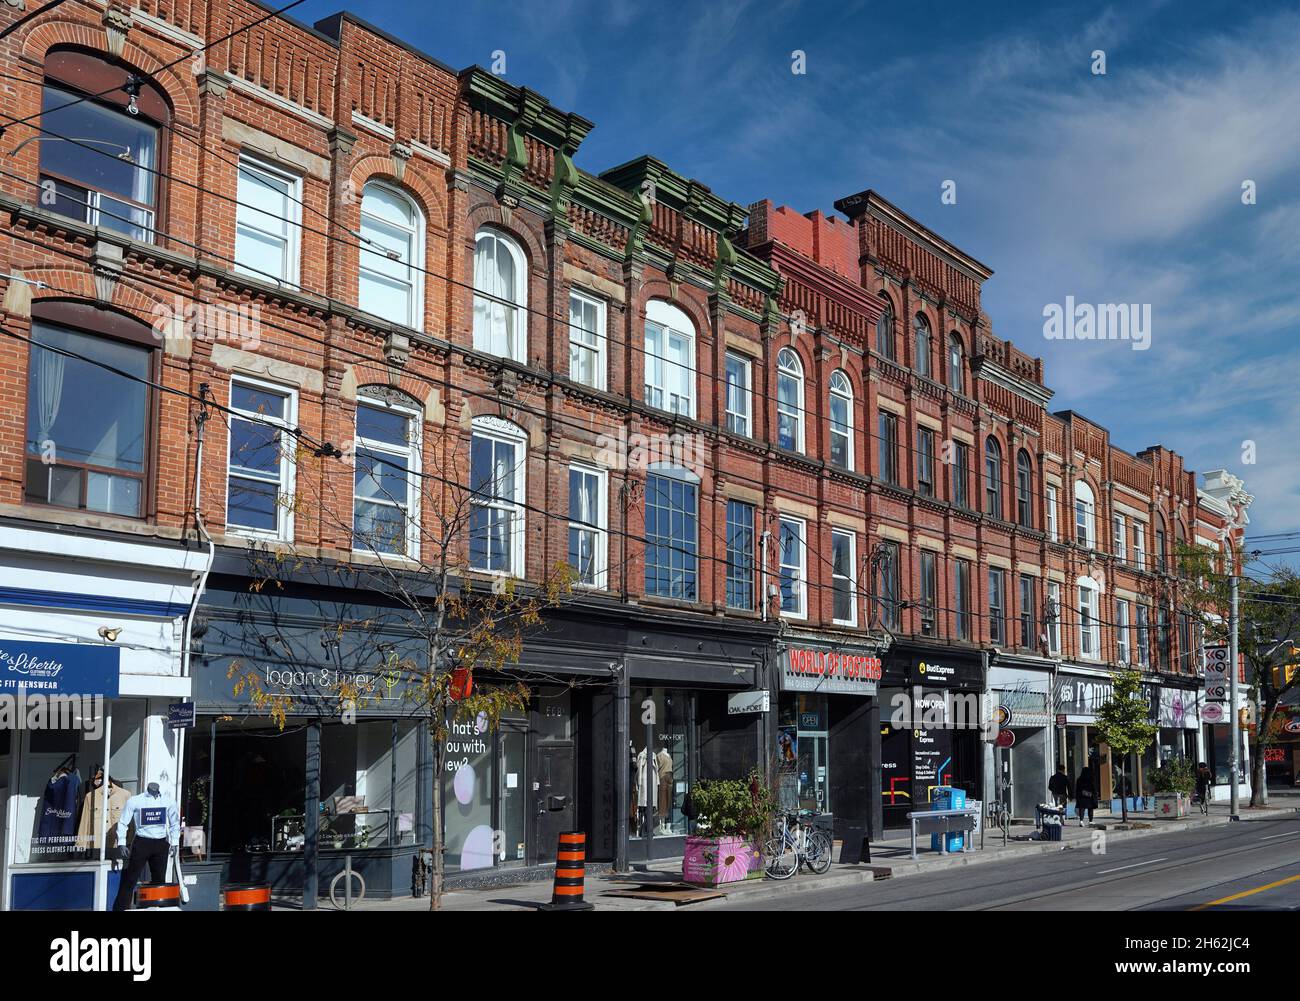 https://c8.alamy.com/comp/2H62JC4/west-queen-street-in-downtown-toronto-preserves-19th-century-commercial-buildings-and-an-eclectic-range-of-indepe-2H62JC4.jpg